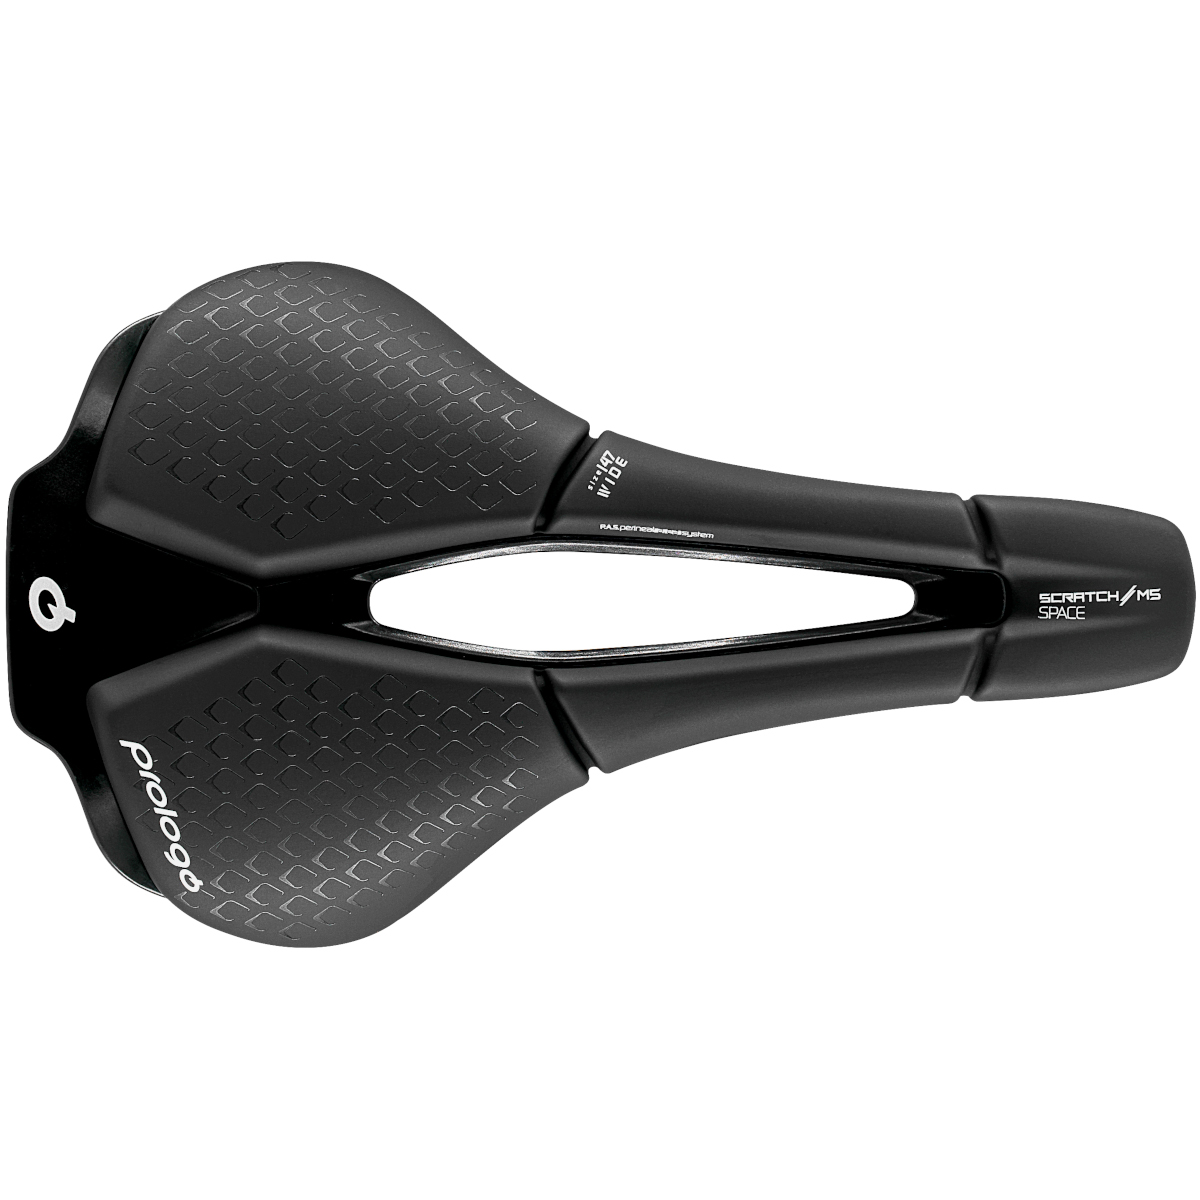 Picture of Prologo Scratch M5 Space TiroX Saddle - black